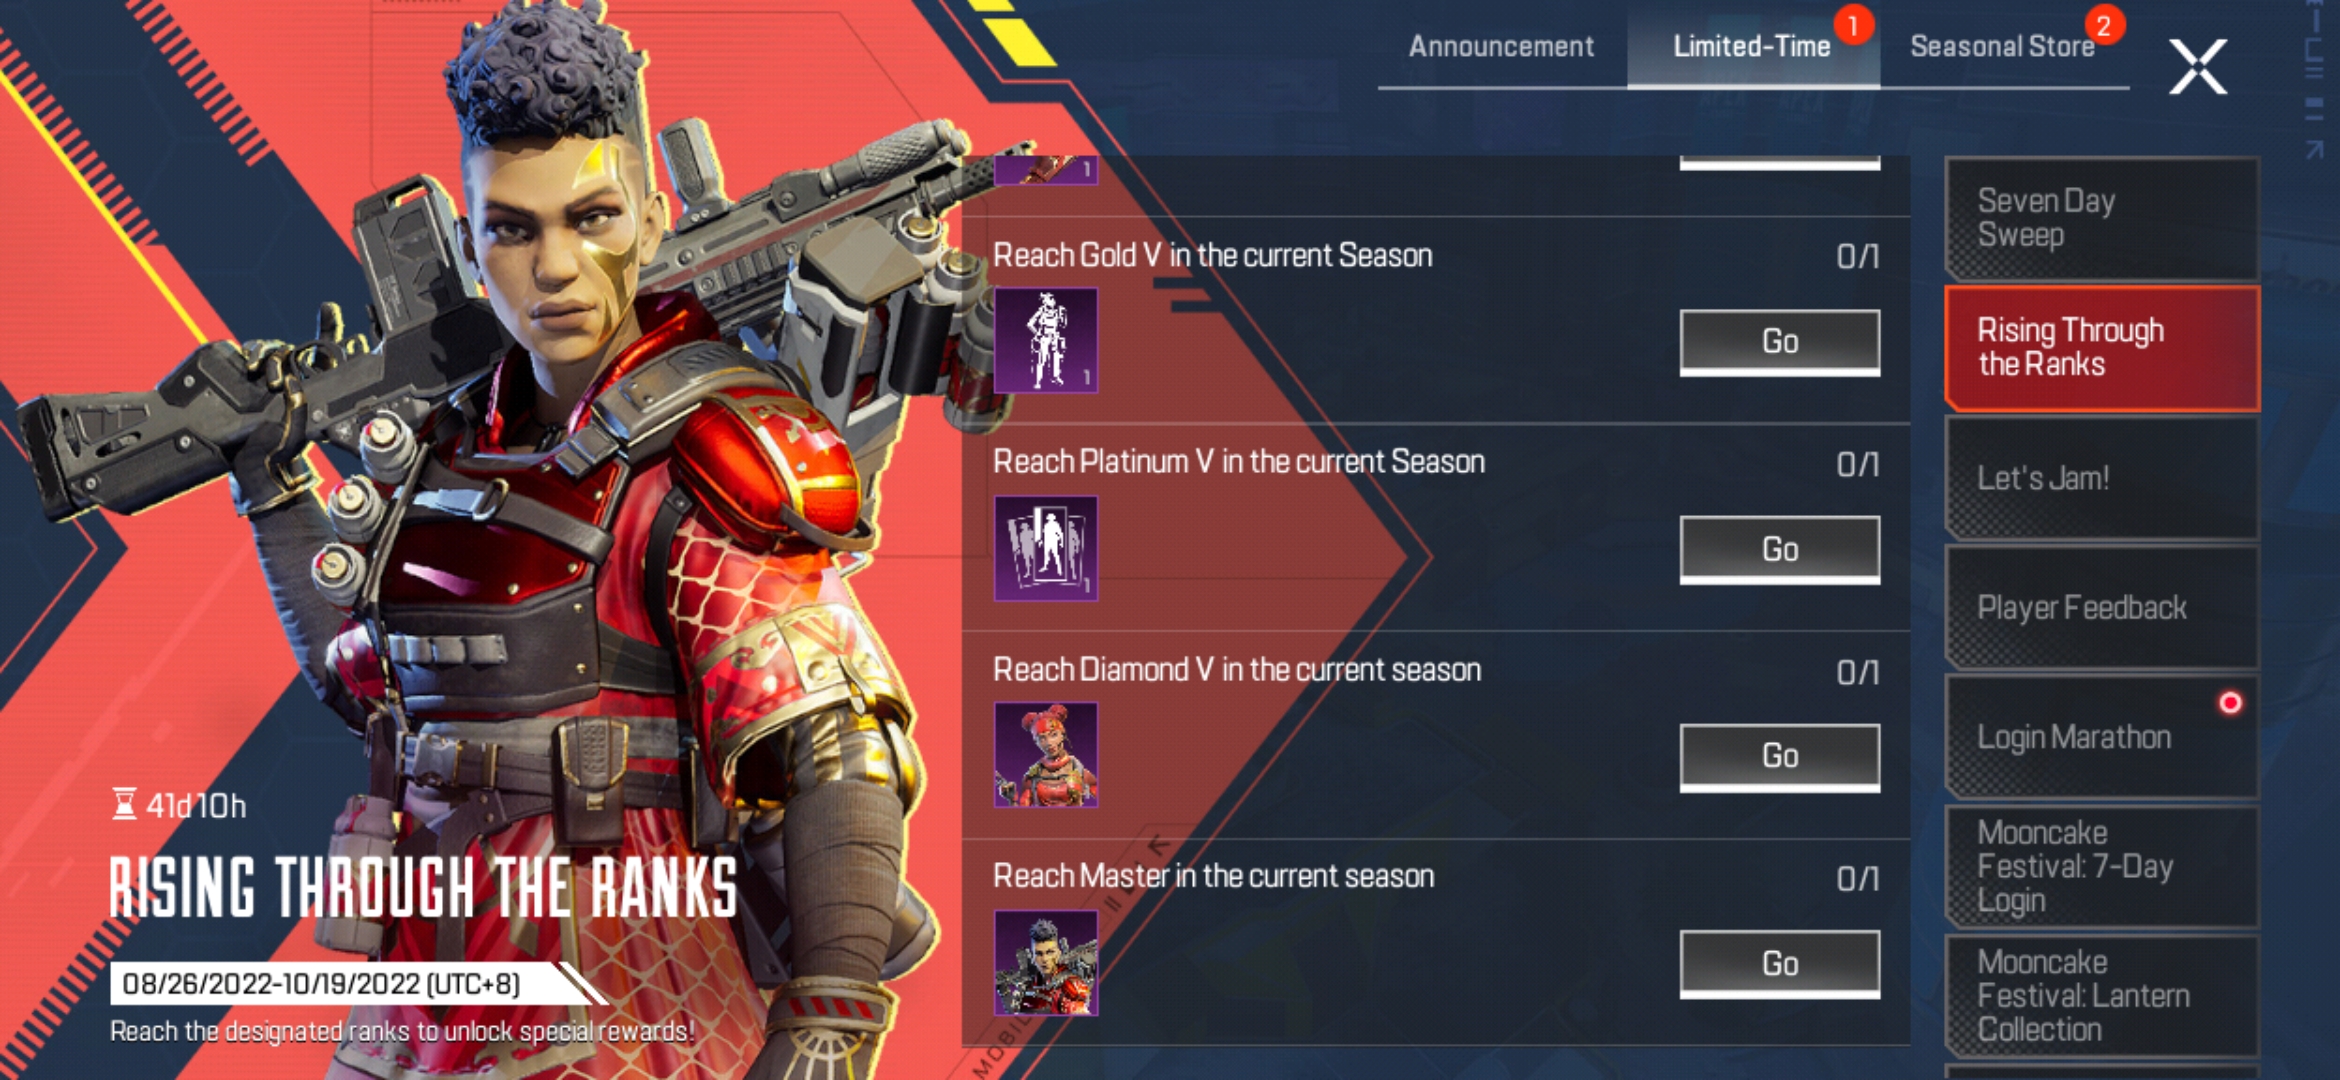 Apex Legends Mobile: Rising Through The Ranks Limited-Time Event Guide